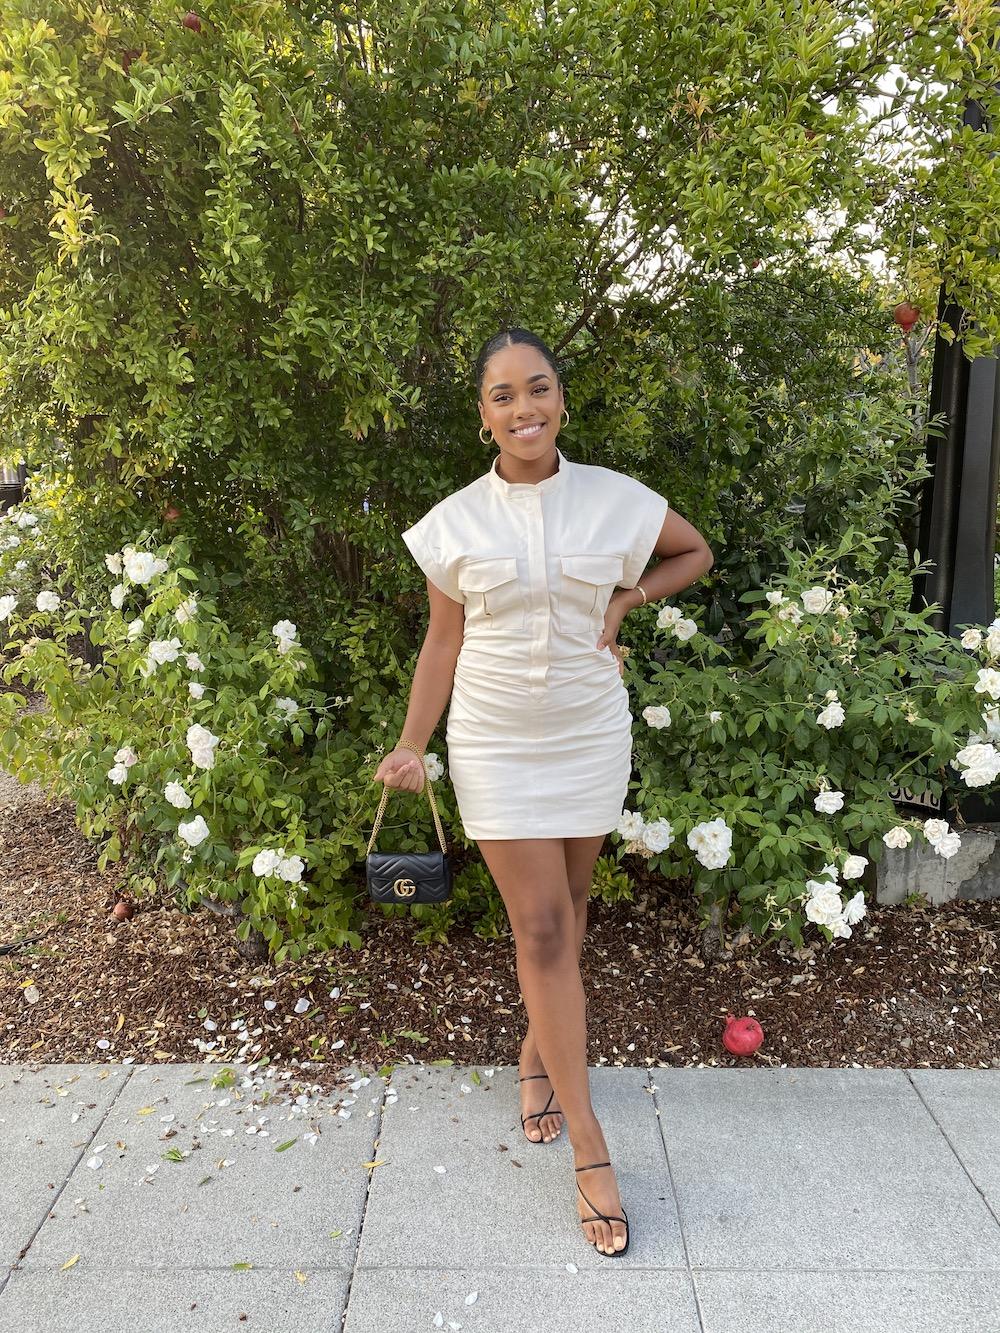 Moss poses before going to dinner at Cole's Chop House in Napa, CA, for her grandmother's 70th birthday in September. Moss wore a neutral dress from Zara paired with black heels from Lulu's and a black bag. Photo courtesy of Camryn Moss